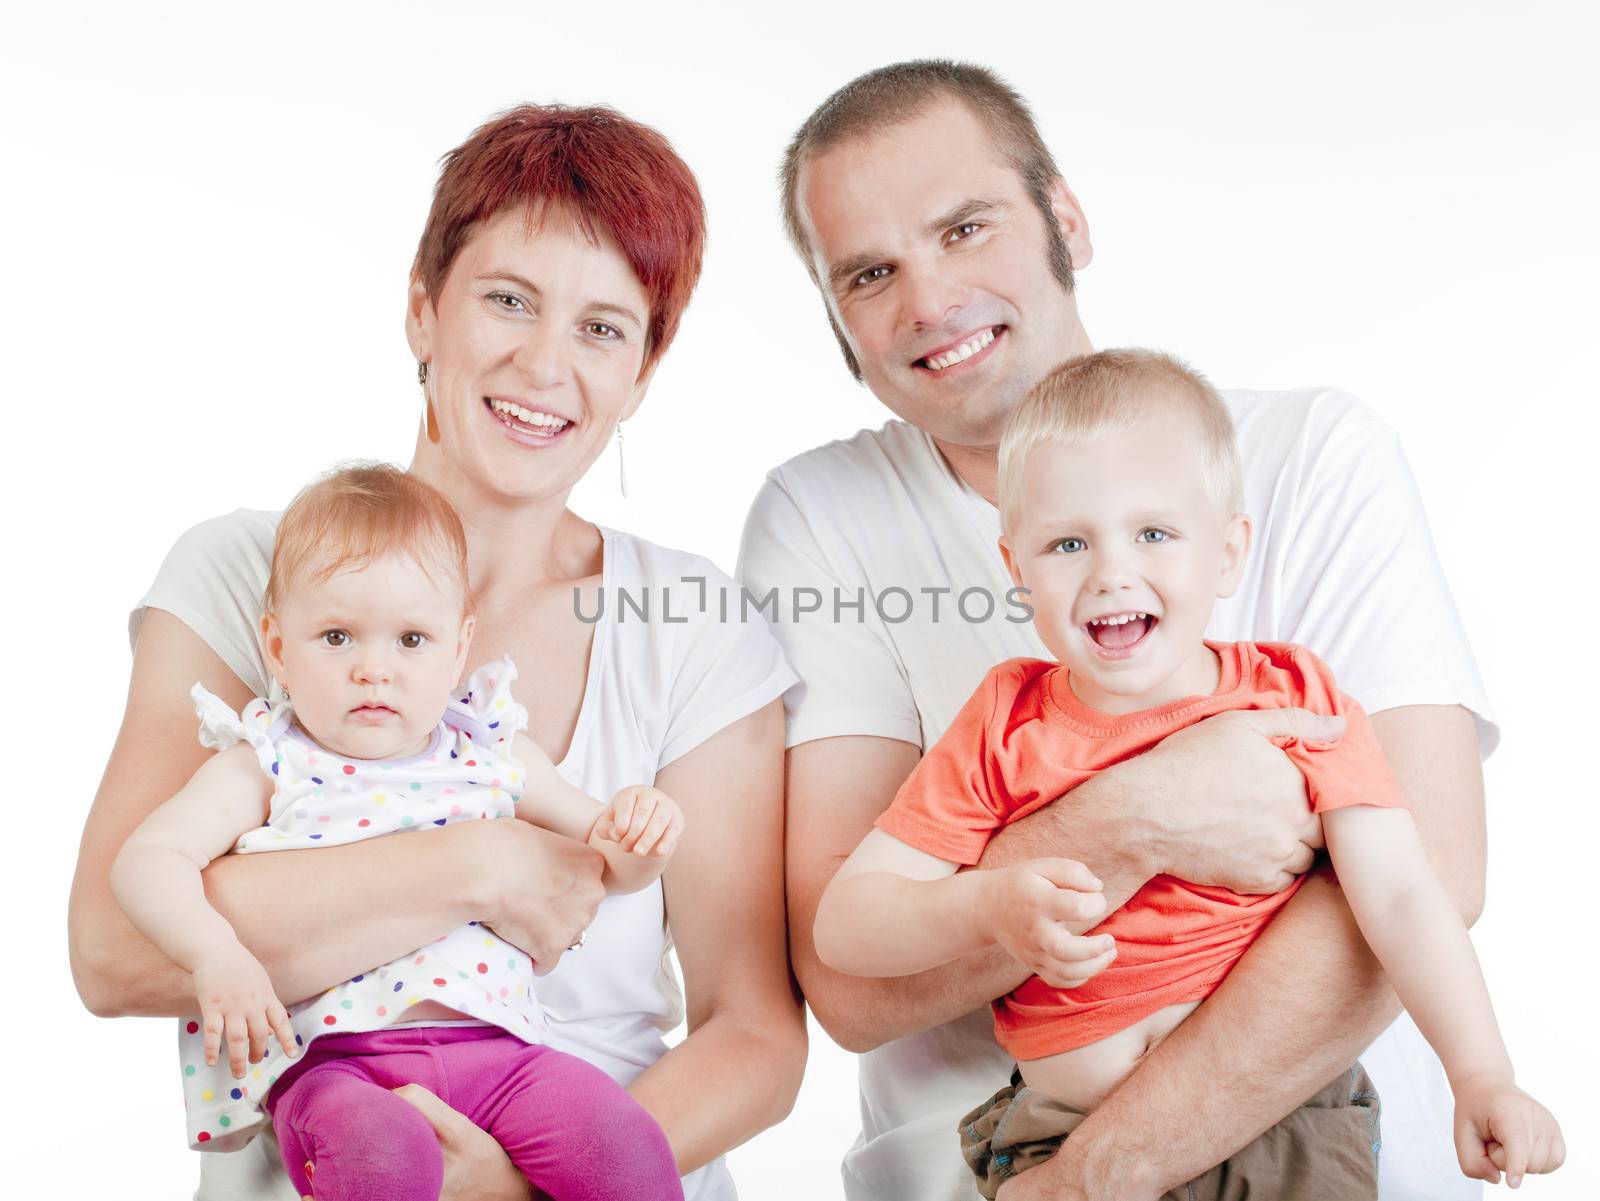 happy parents with their two children looking at the camera, smiling - isolated on white